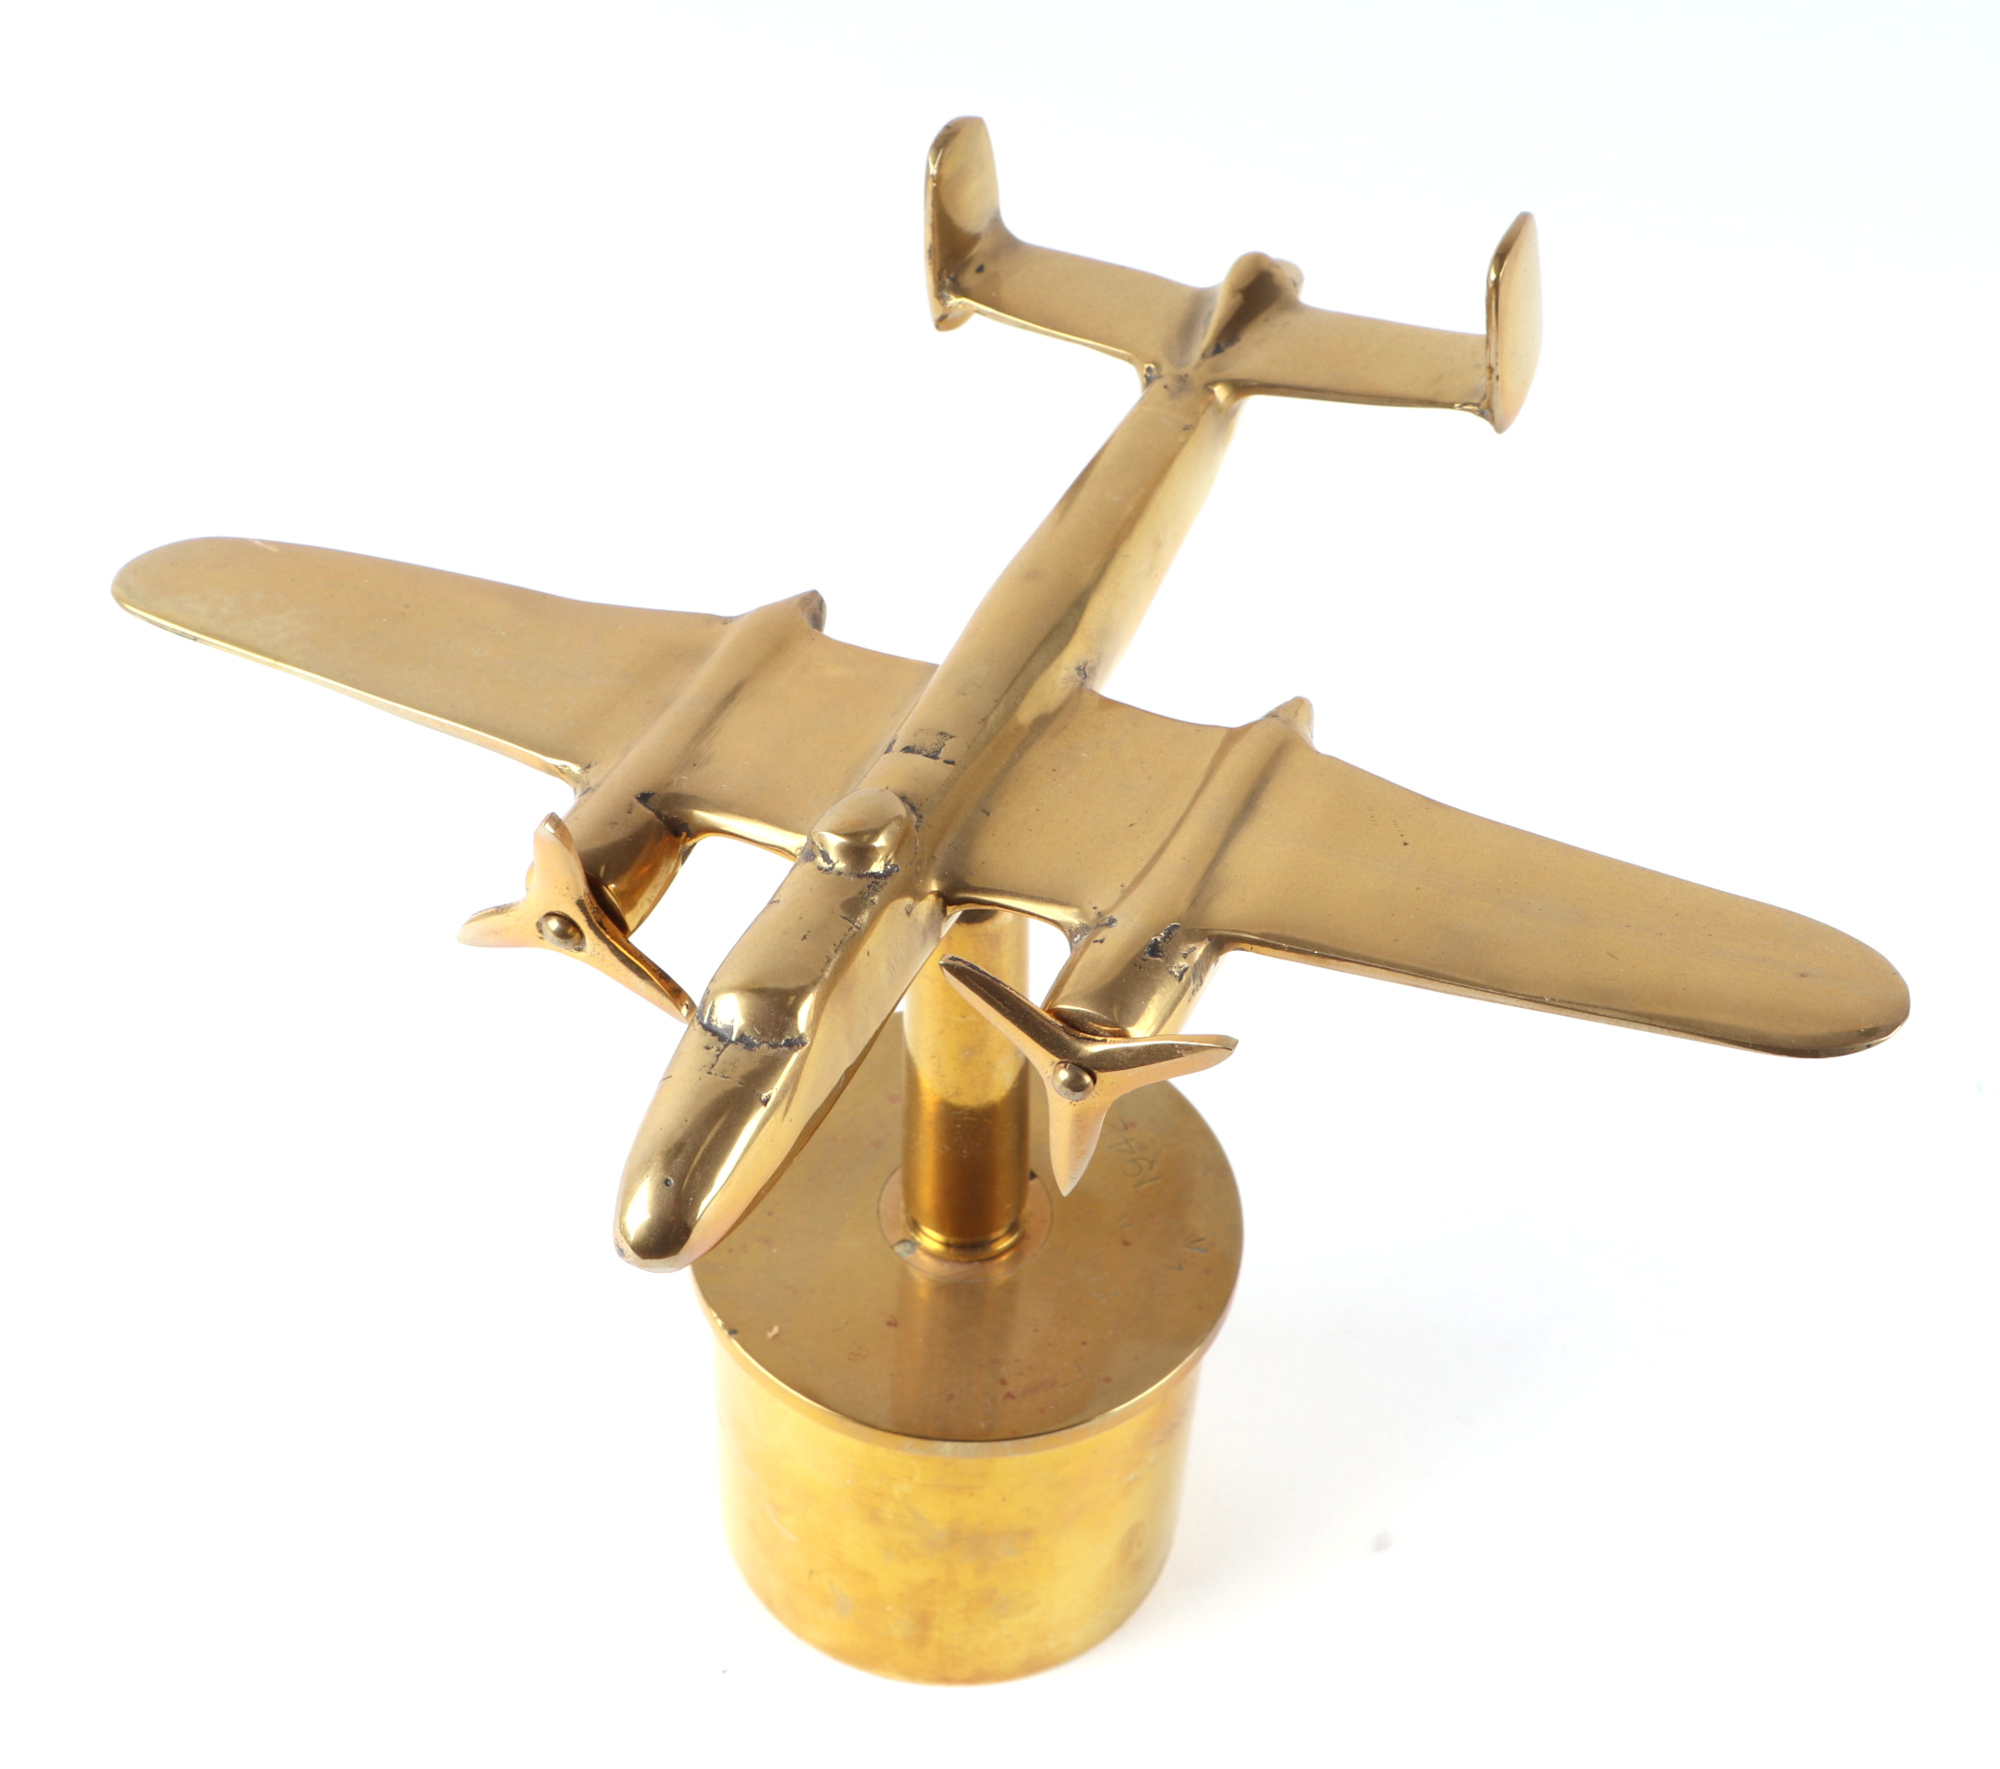 A trench art cast brass model of a Mitchell aircraft, mounted on a brass shell case, 27cm diameter. - Image 2 of 2